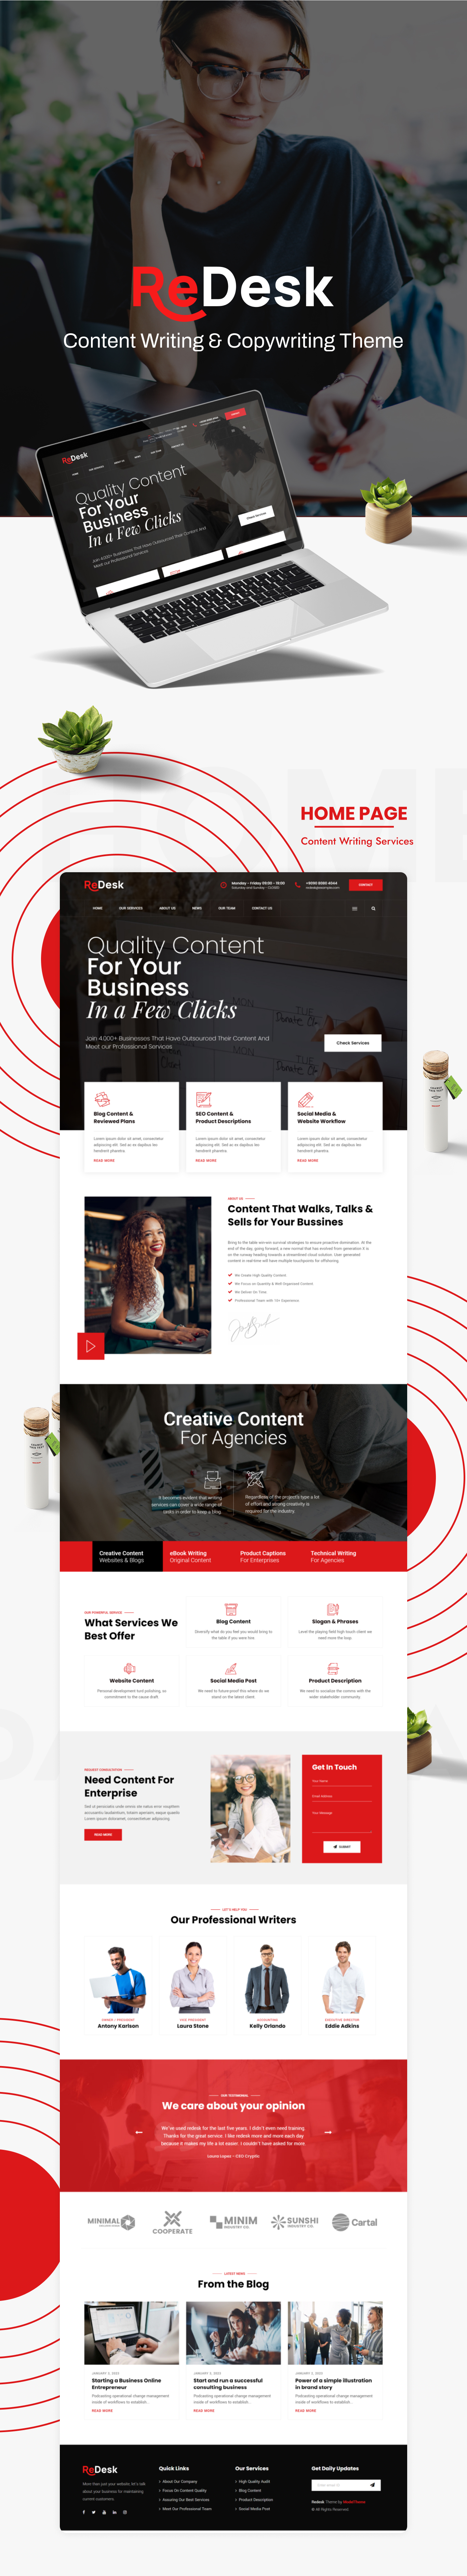 ReDesk - Content Writing & Copywriting Theme - 1